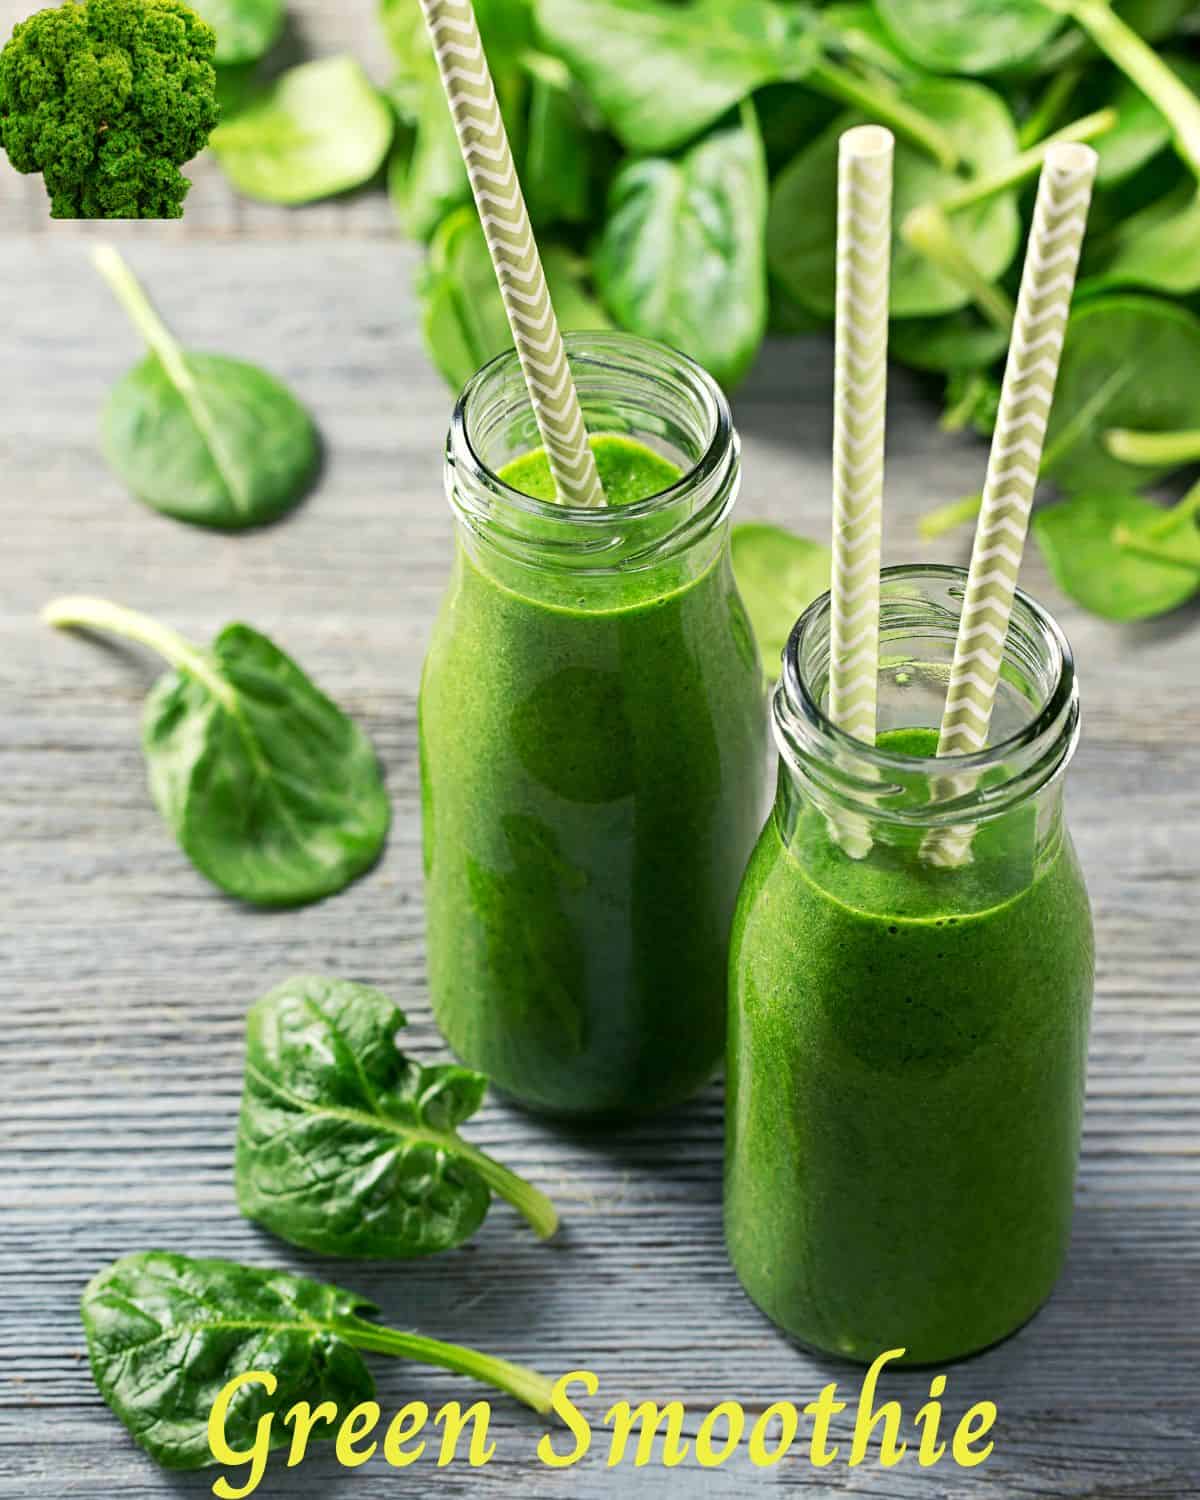 green smoothie in a smoothie bottle with spinach and kale leaves around